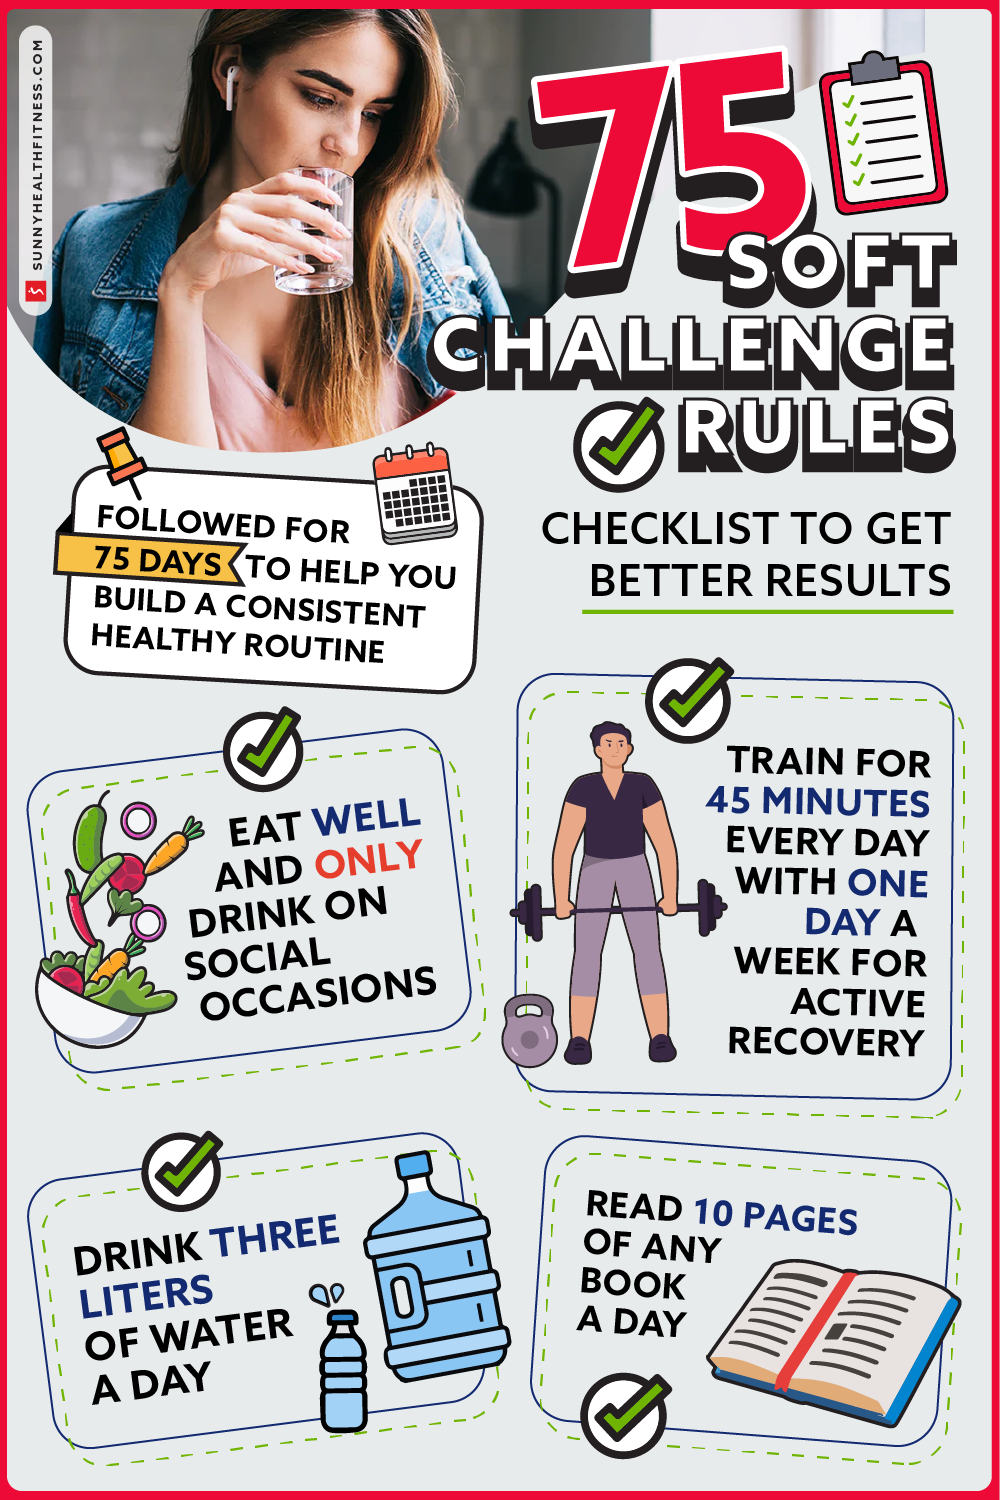 75 Soft Challenge Rules: Checklist to Get Better Results